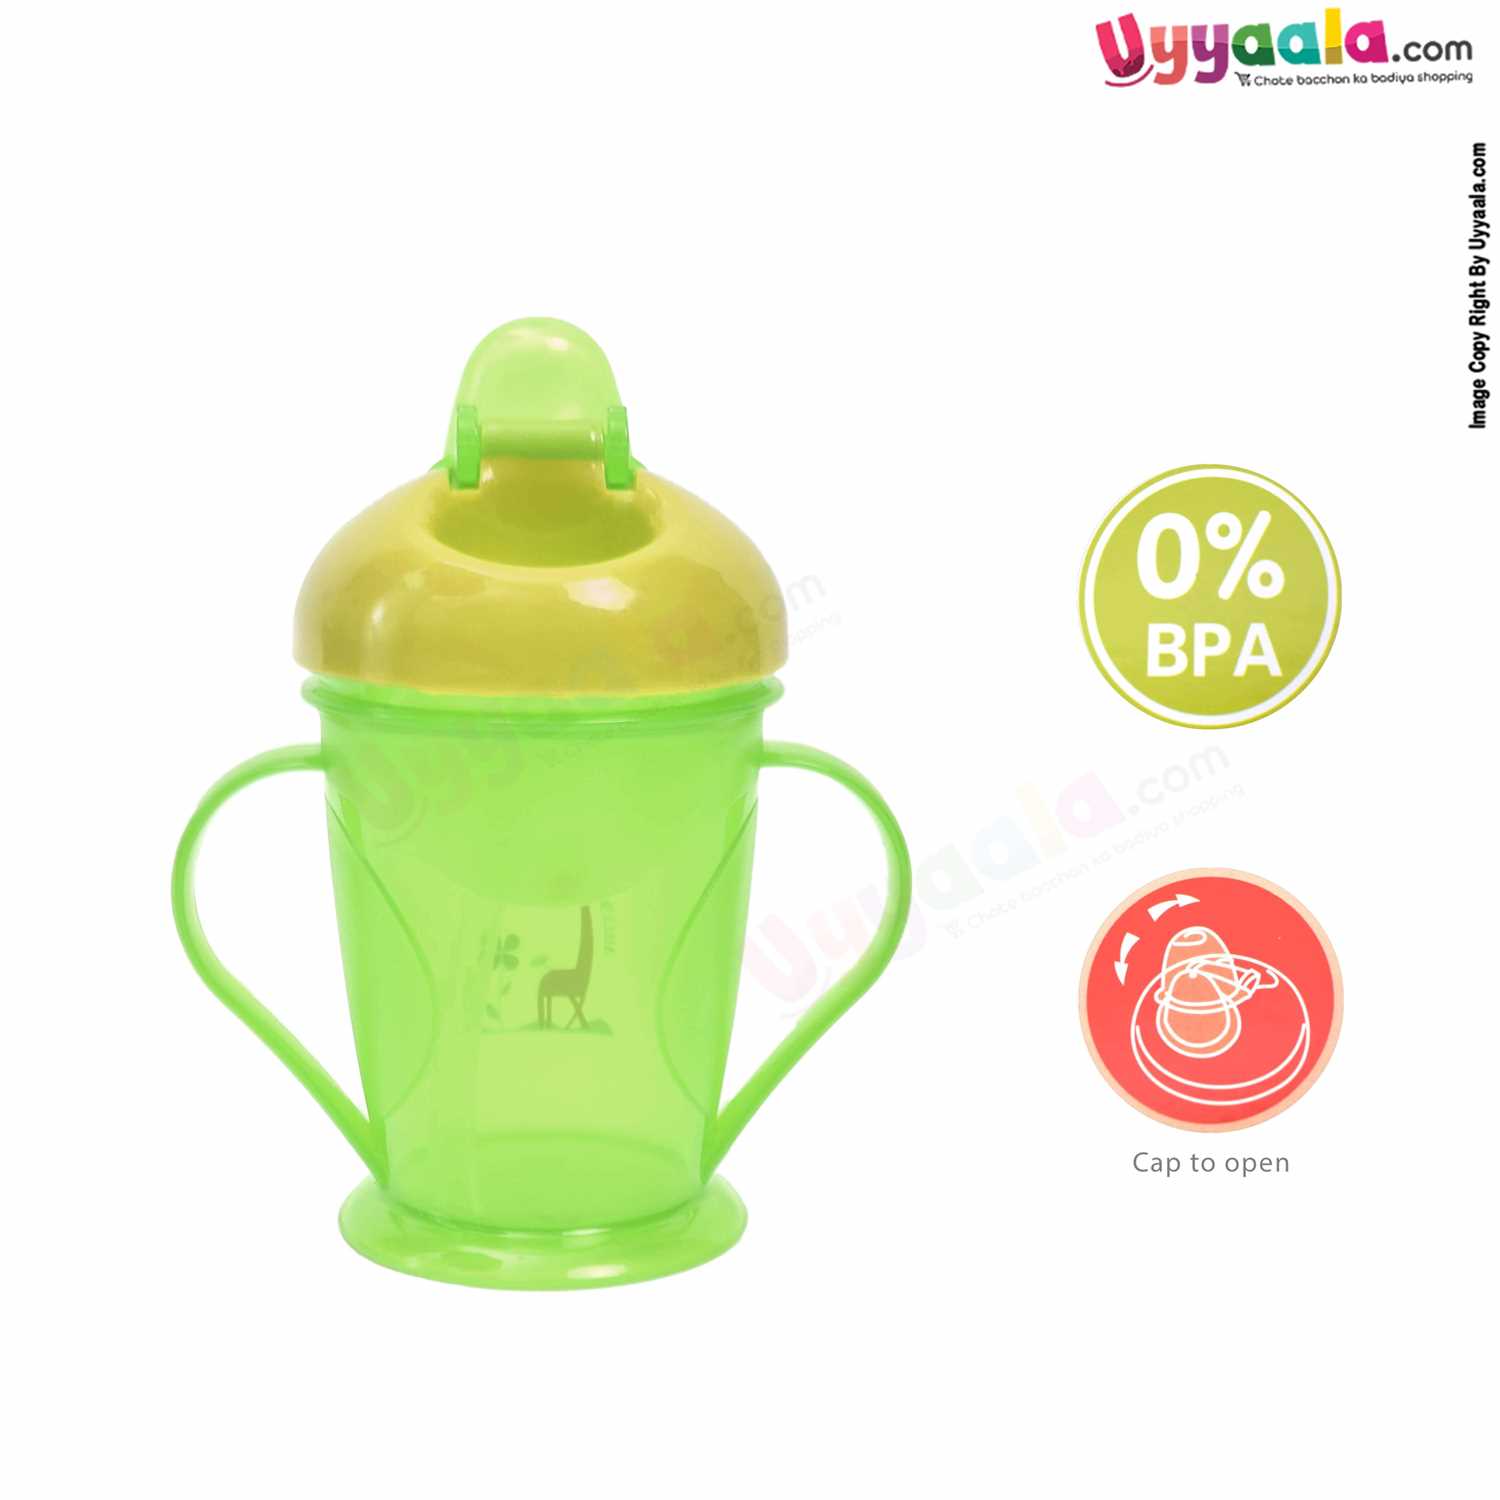 MUMLOVE Twin Handle Baby Sippy Cup Straw model Spout Sipper With Giraffe Print 180ml